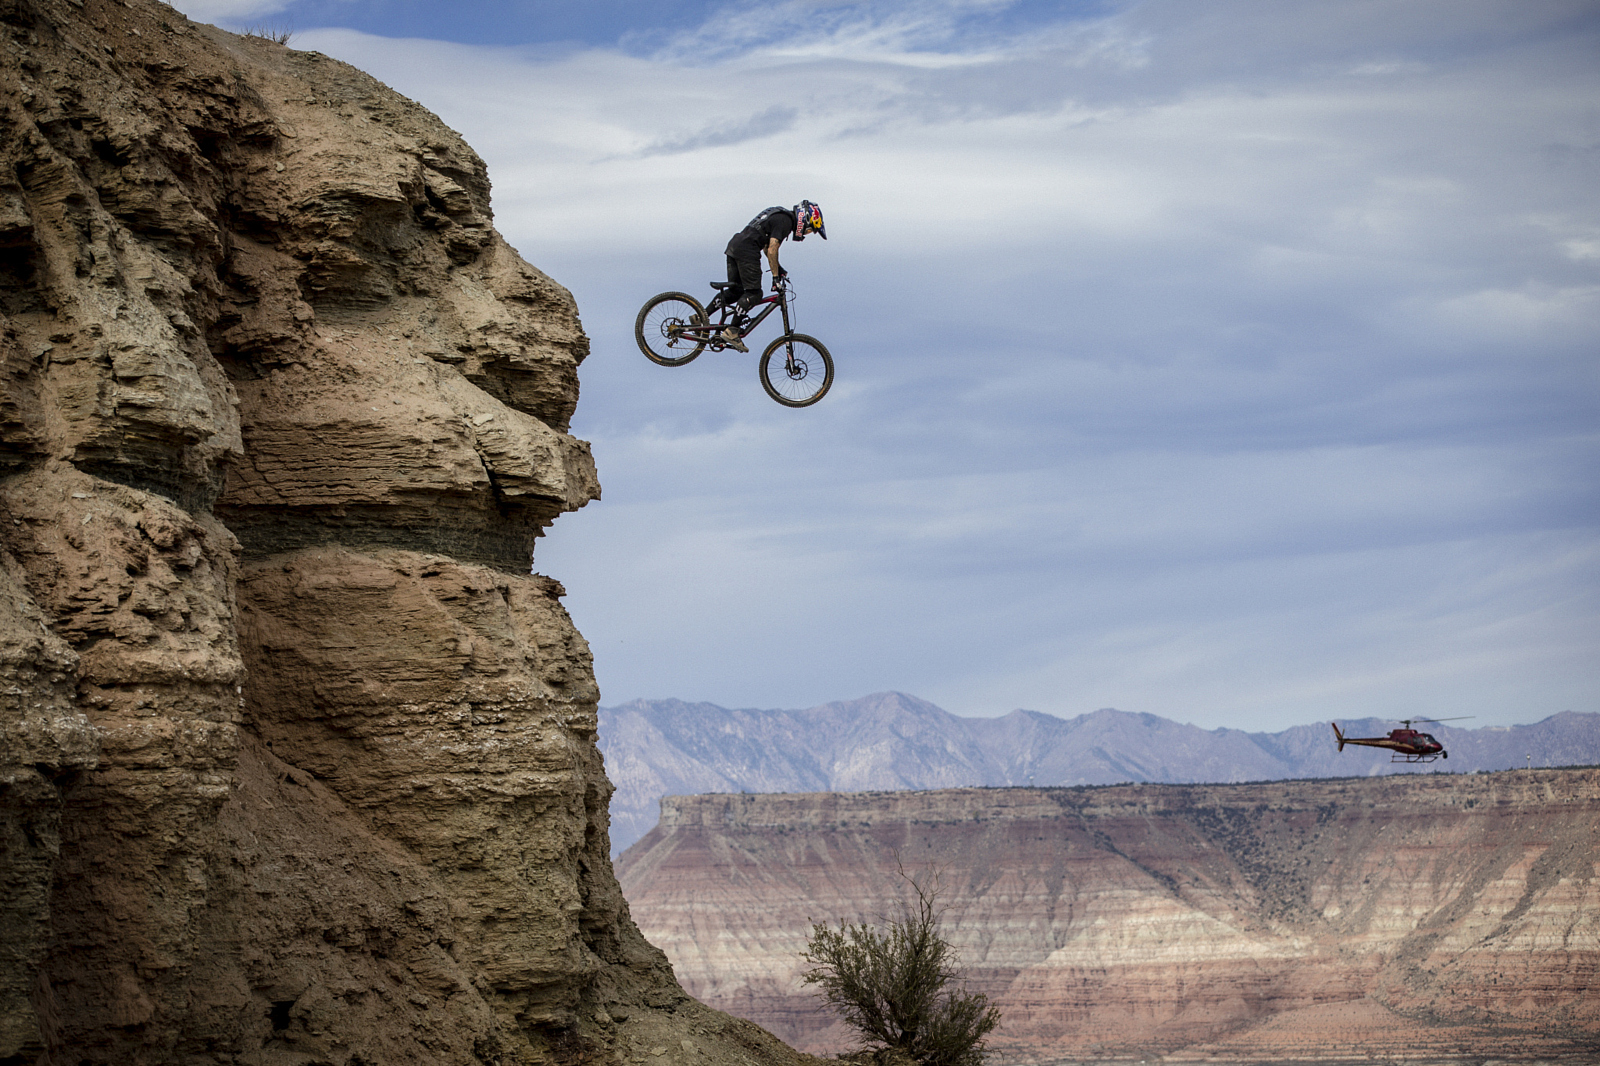 25 Powerful Photos Of Bikes Up In The Air To Excite Your Day